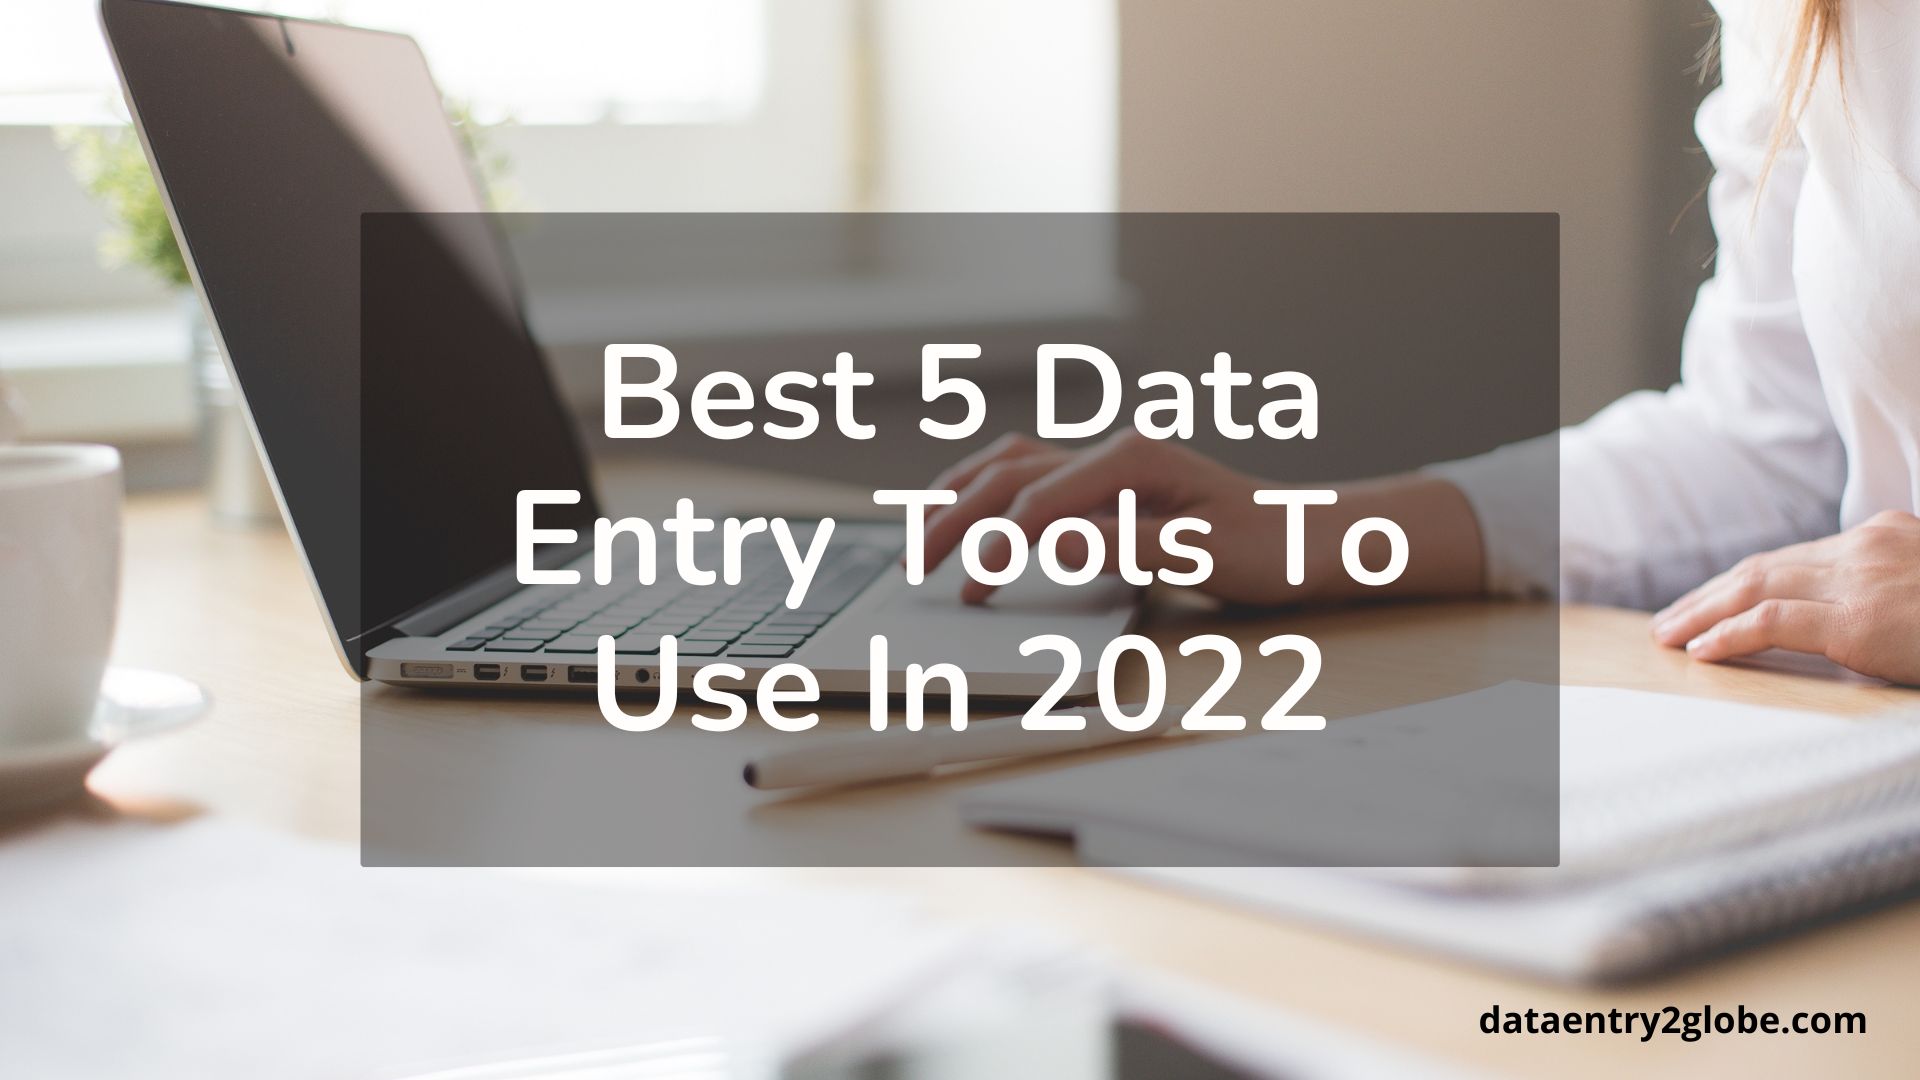 Best 5 Data Entry Tools To Use In 2022